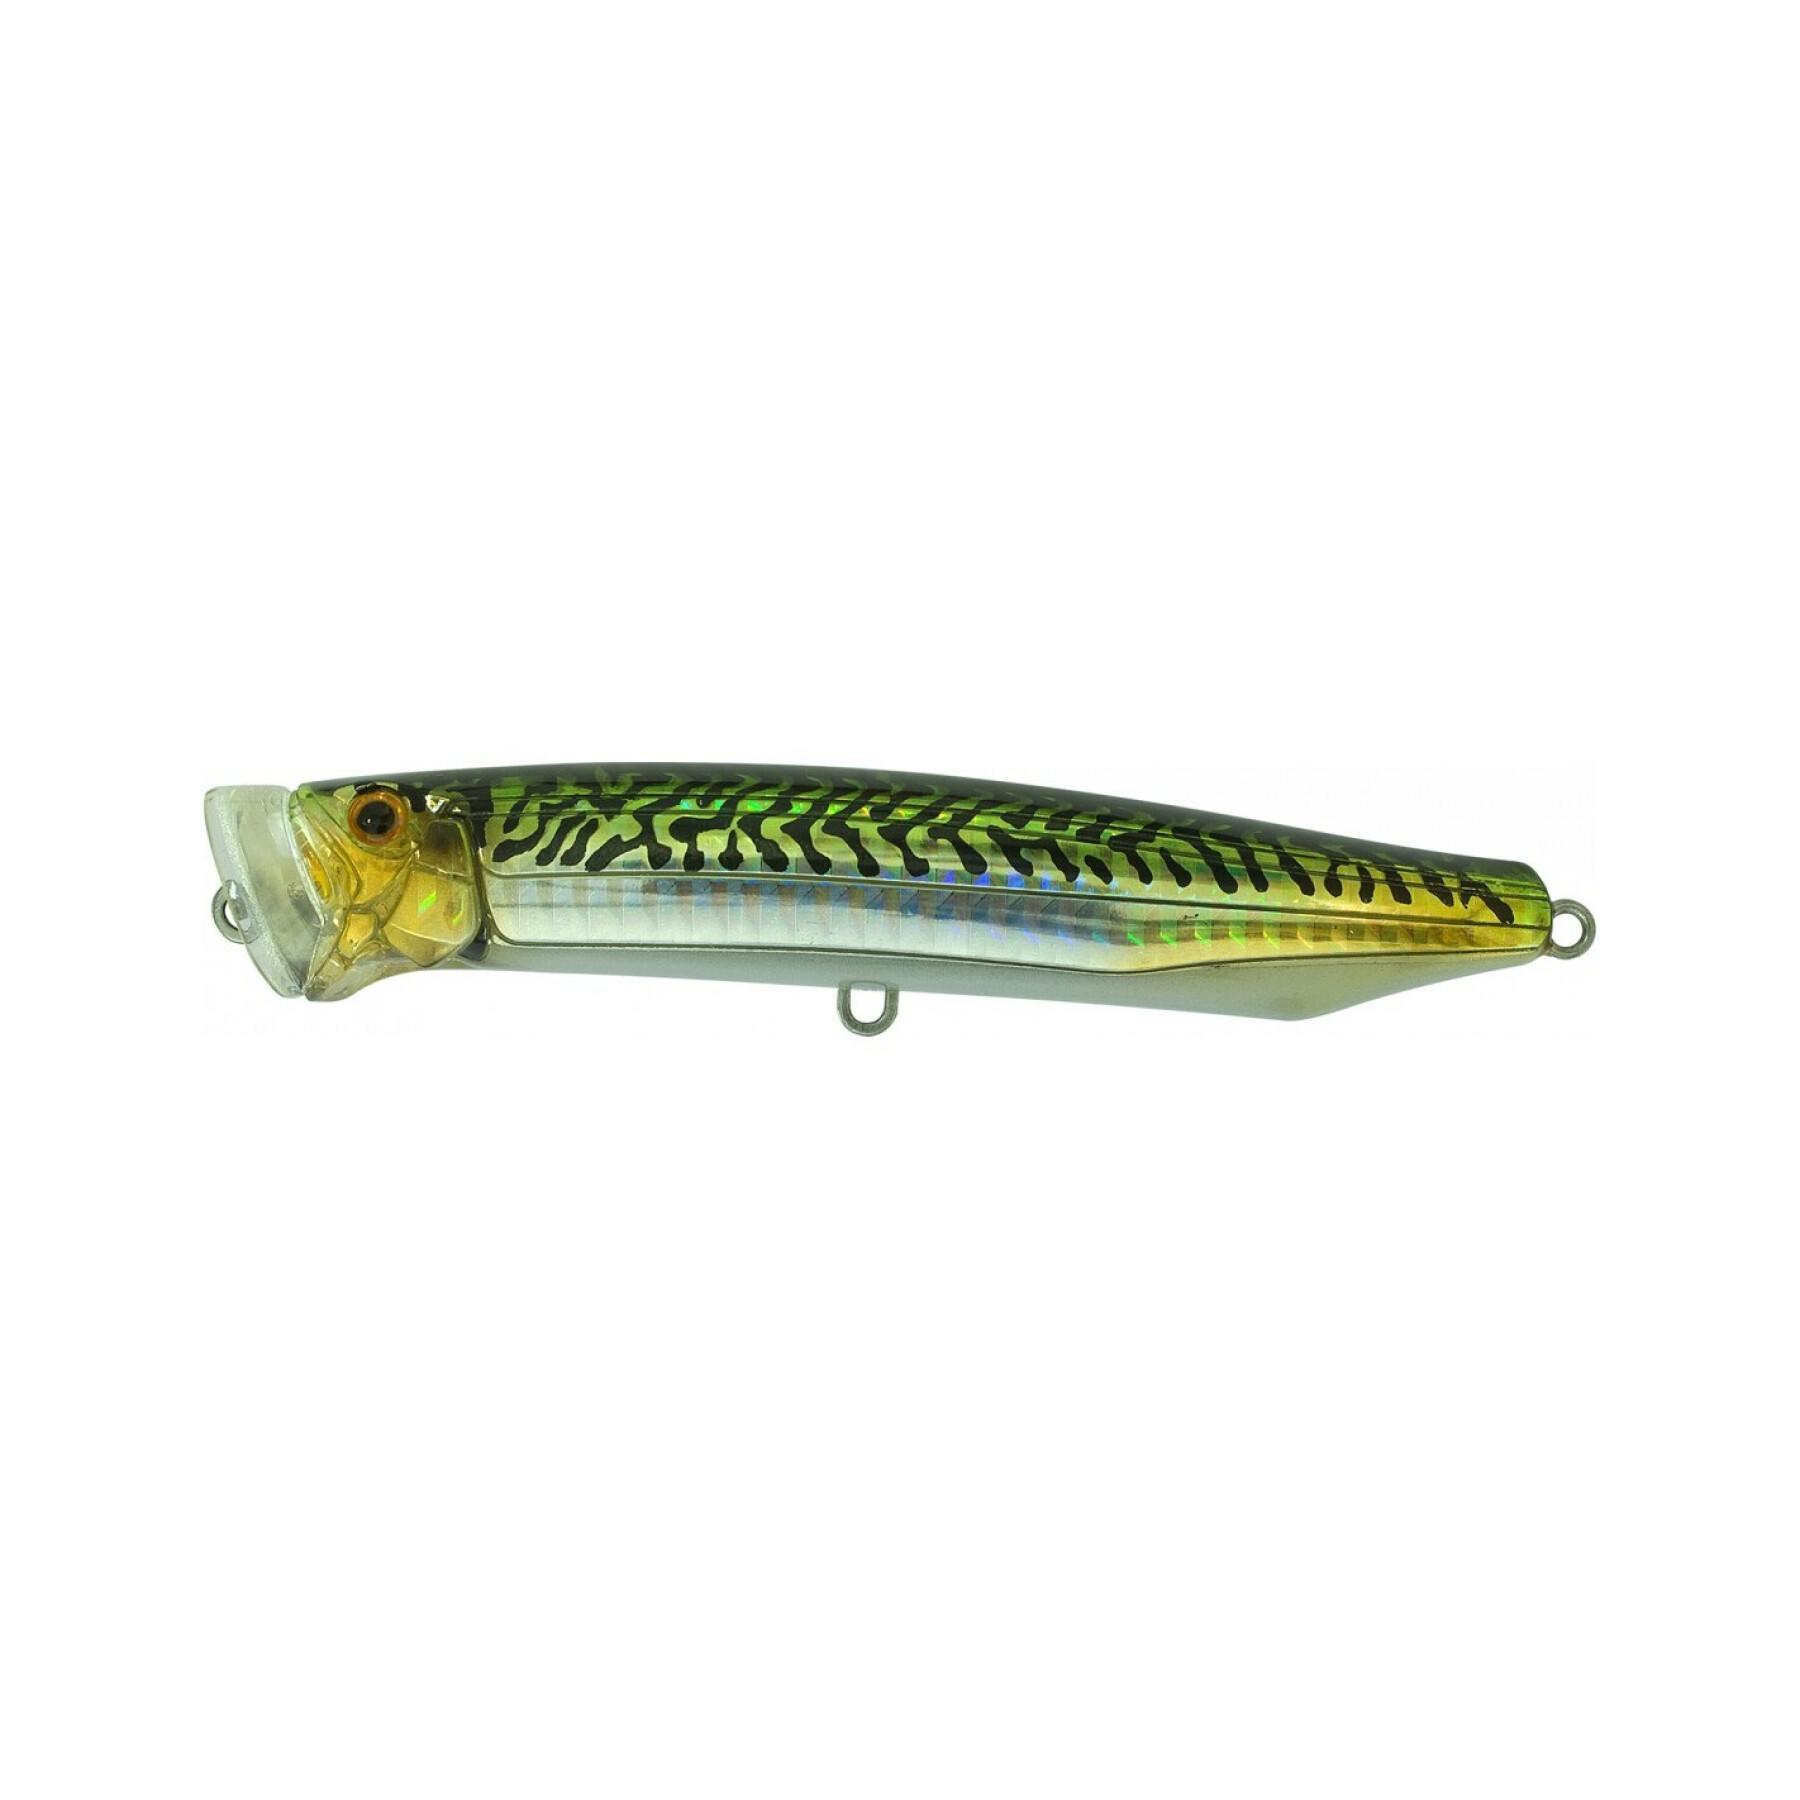 Lure Tackle House Feed FP 120 30g